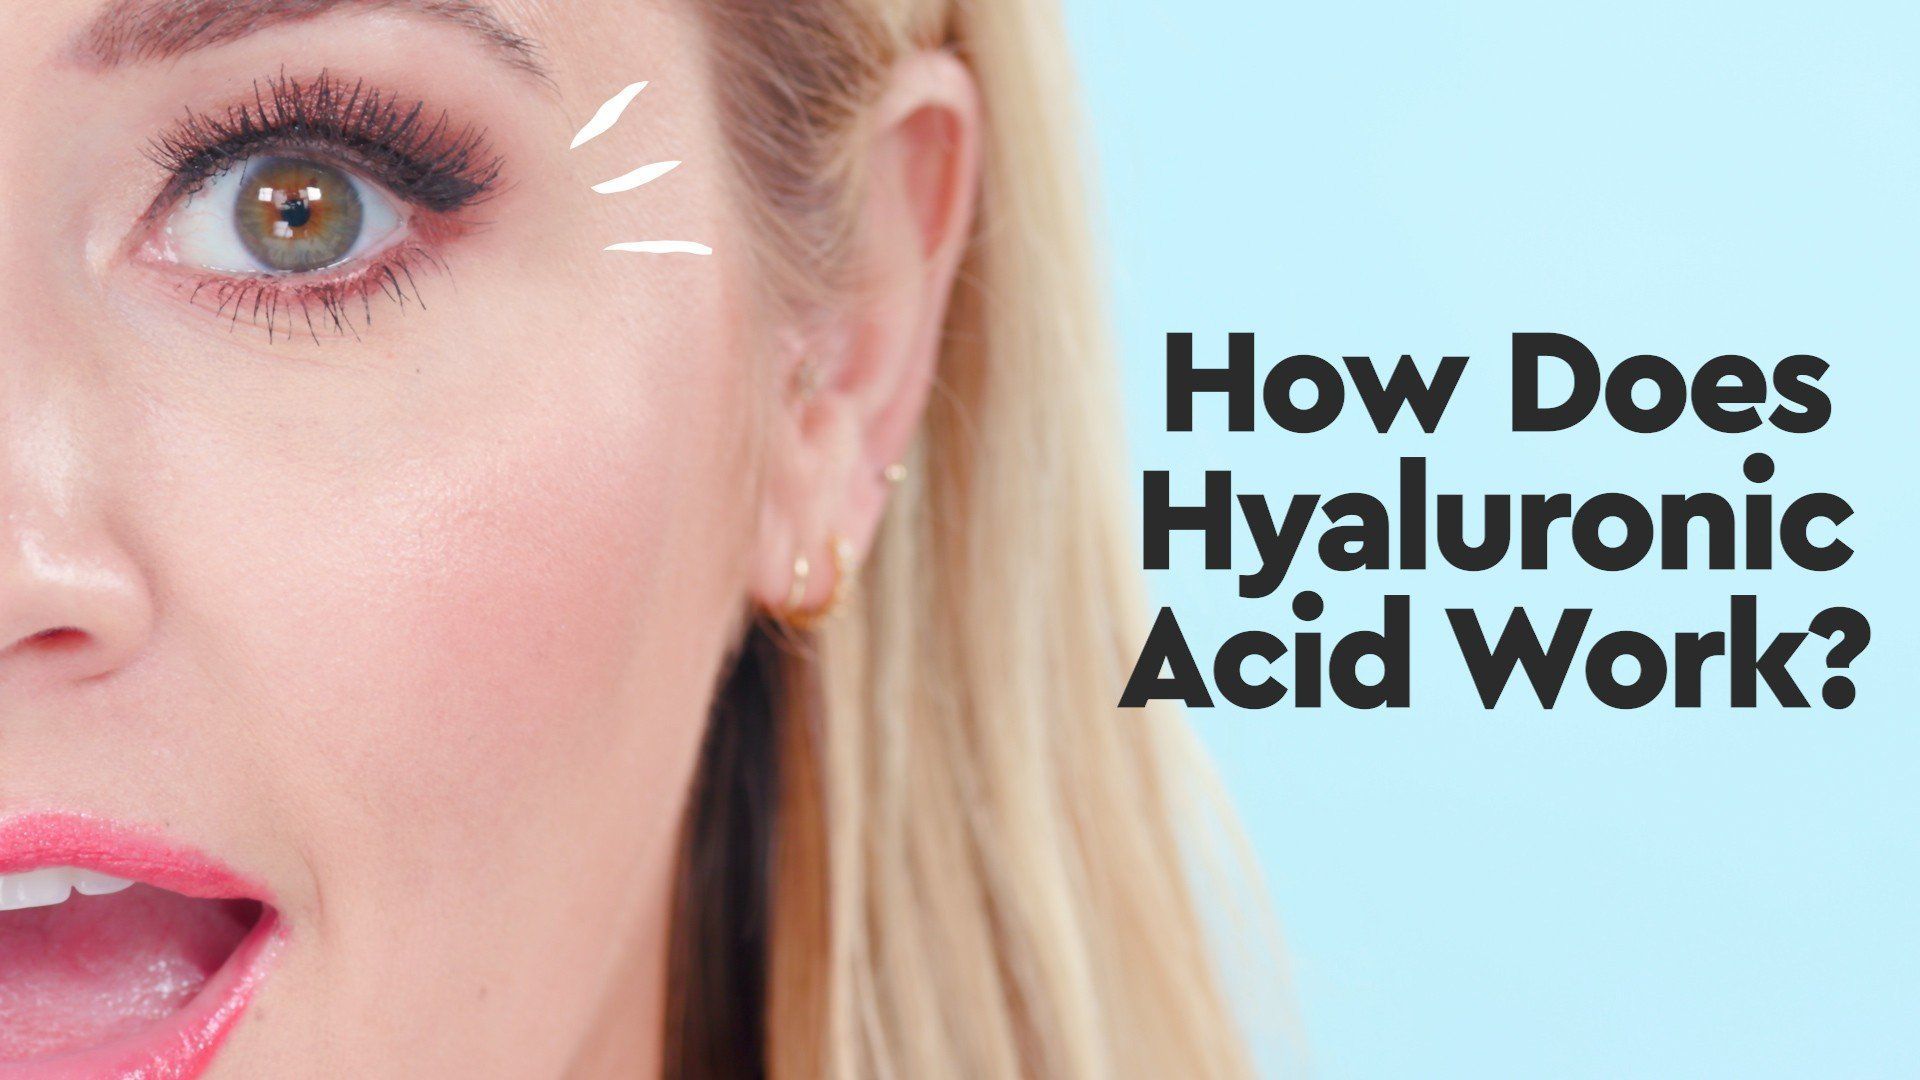 We Know Hyaluronic Acid is Good For Hydration, But Can It Actually Dry Out Your Skin? - We Know Hyaluronic Acid is Good For Hydration, But Can It Actually Dry Out Your Skin? -   18 beauty Treatments pimples ideas